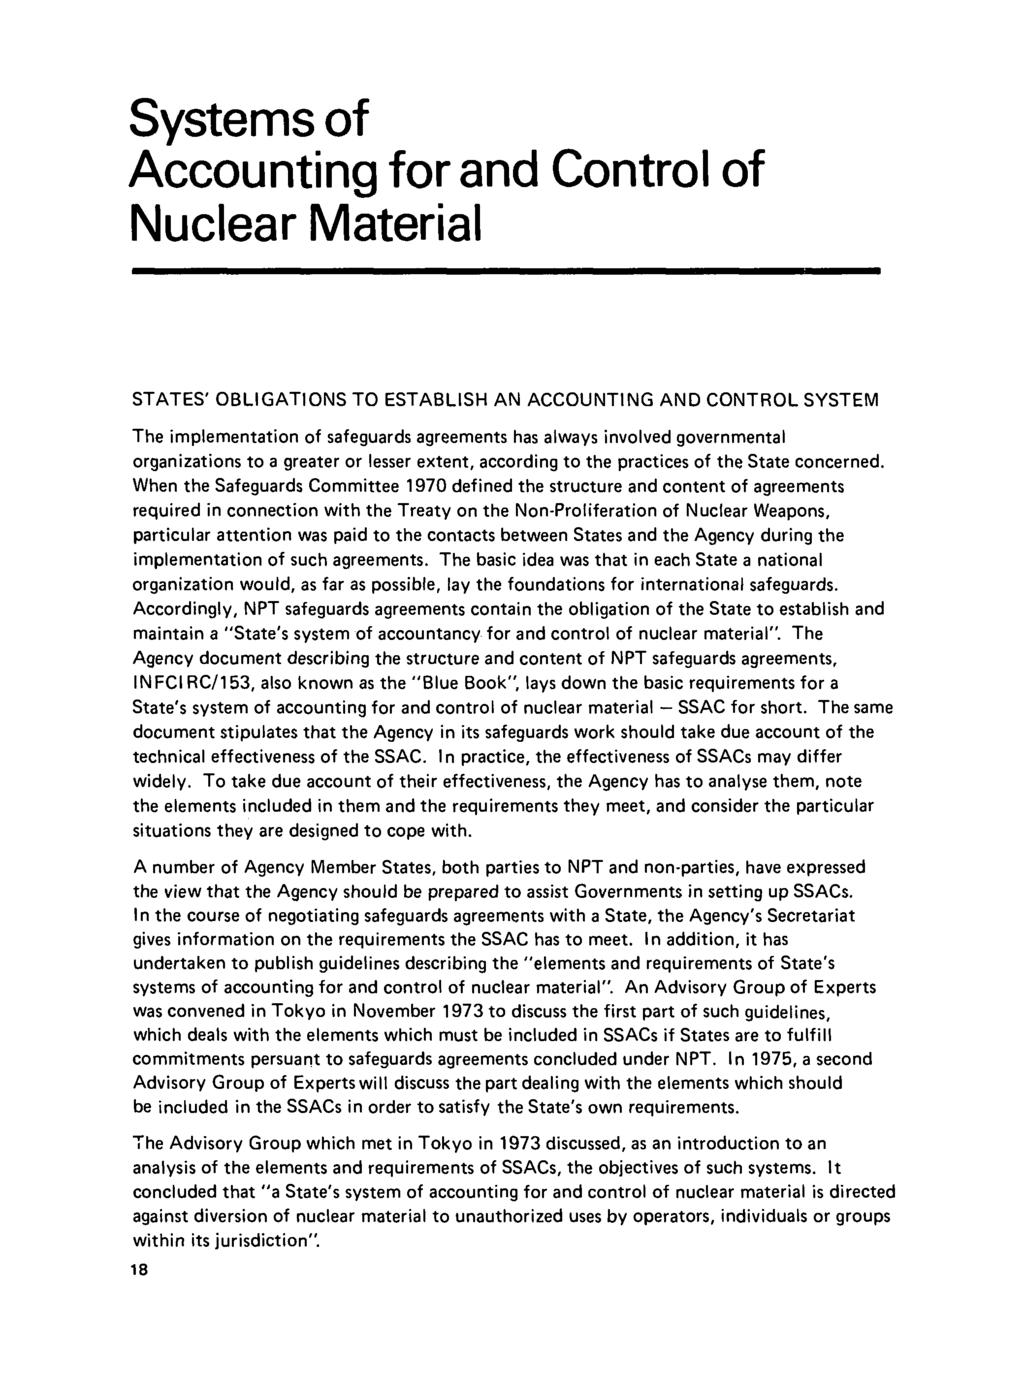 Systems of Accounting for and Control of Nuclear Material STATES' OBLIGATIONS TO ESTABLISH AN ACCOUNTING AND CONTROL SYSTEM The implementation of safeguards agreements has always involved